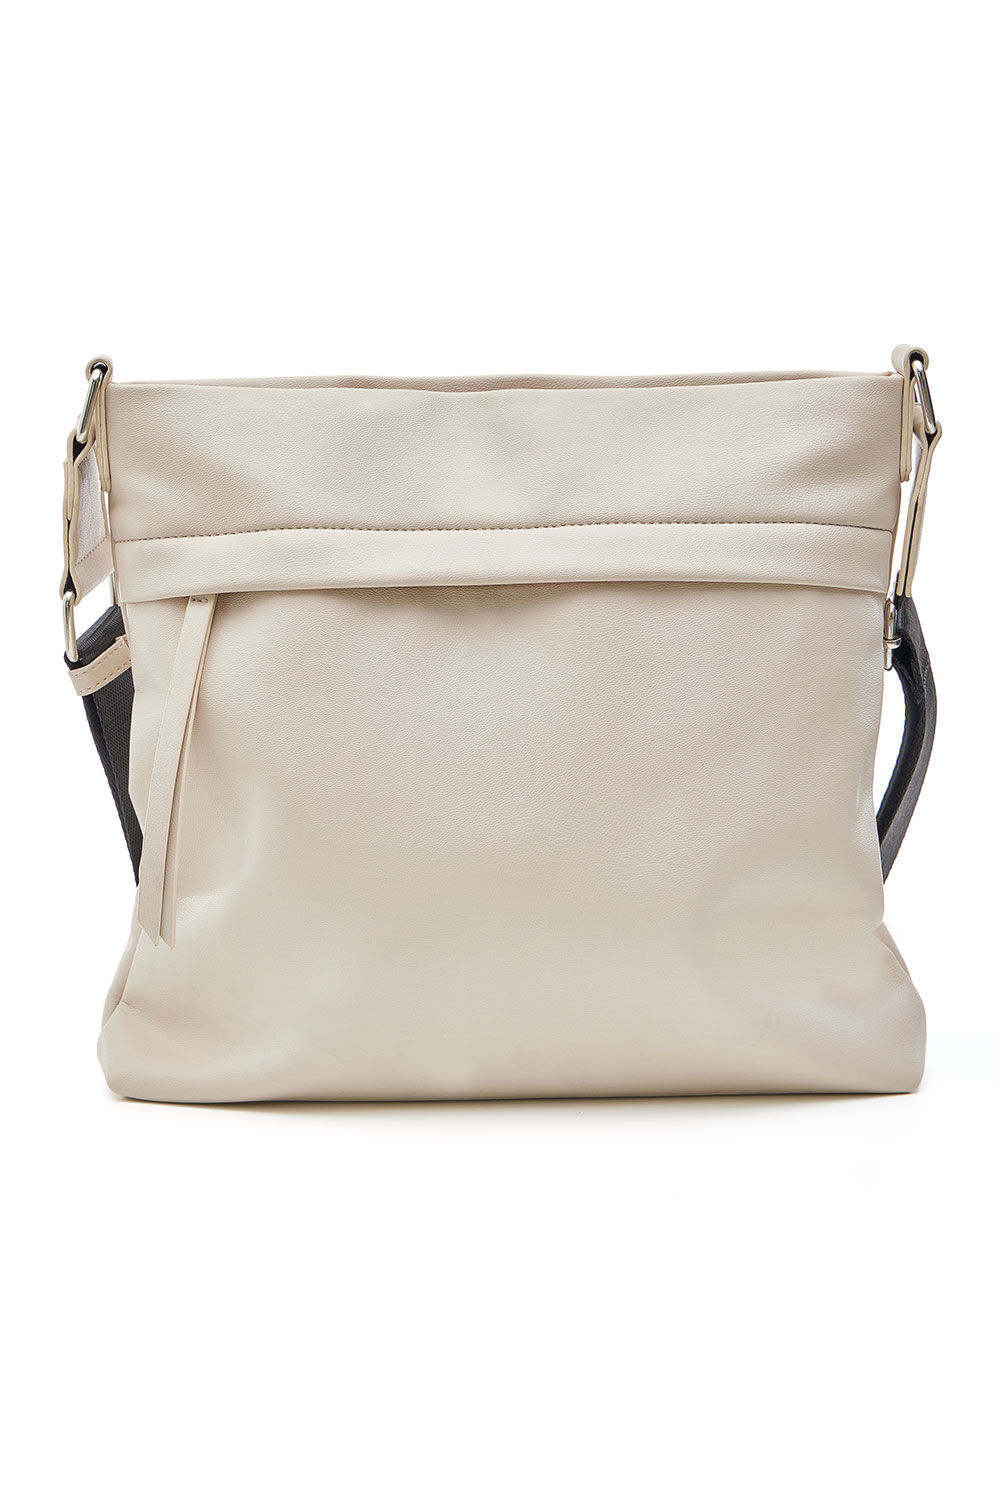 Bonmarche Beige PU Cross Body Bag With Fabric Strap and Zip Detail